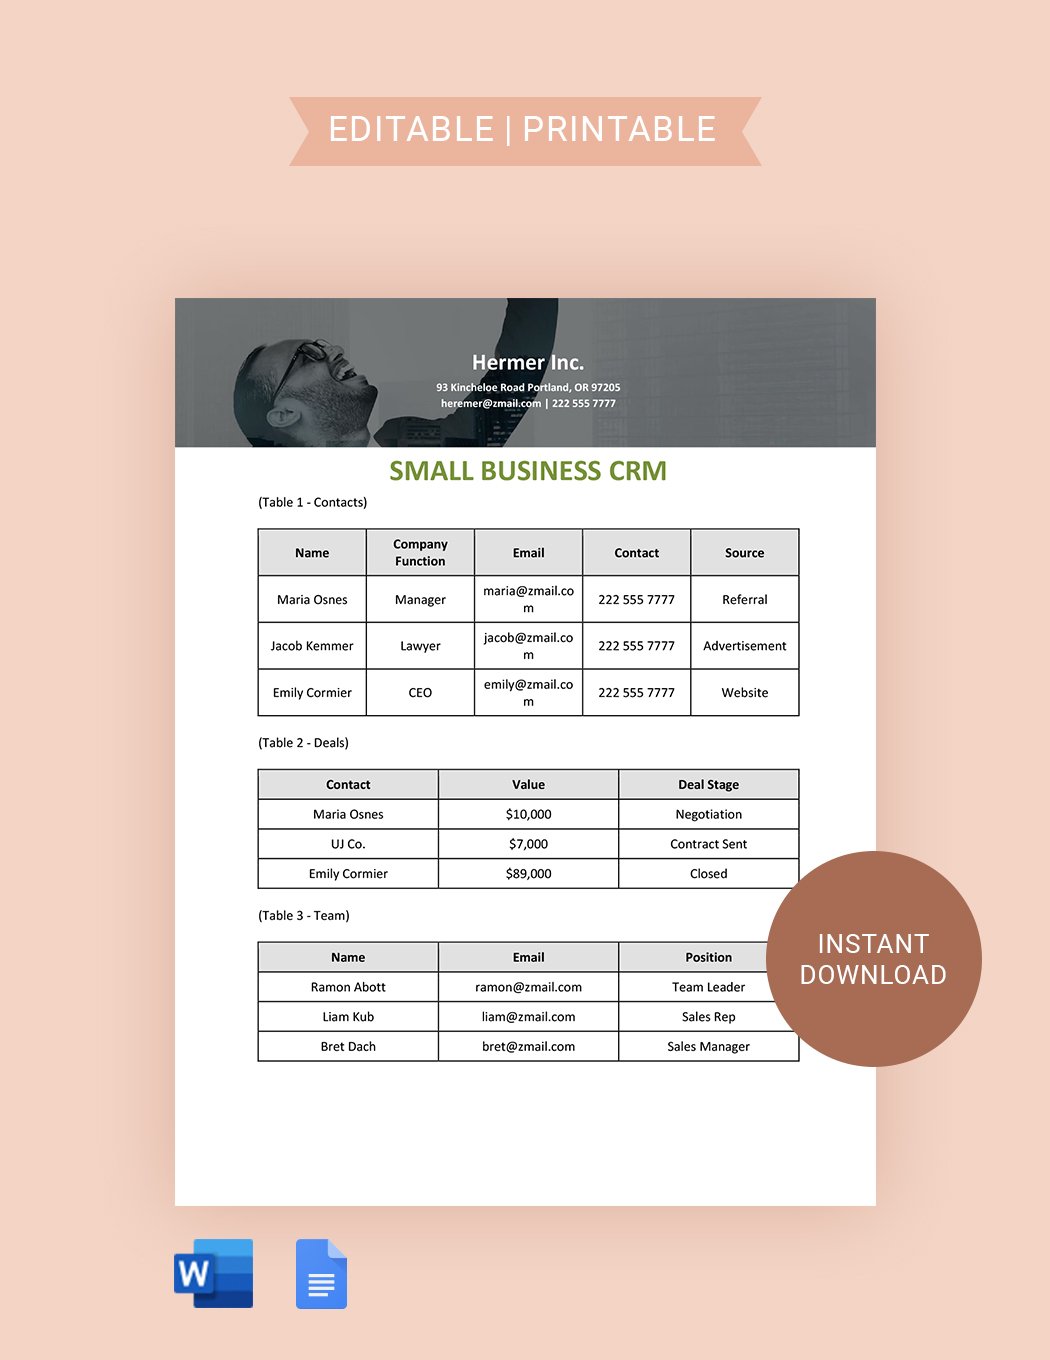 Small Business CRM Template in Word, Google Docs